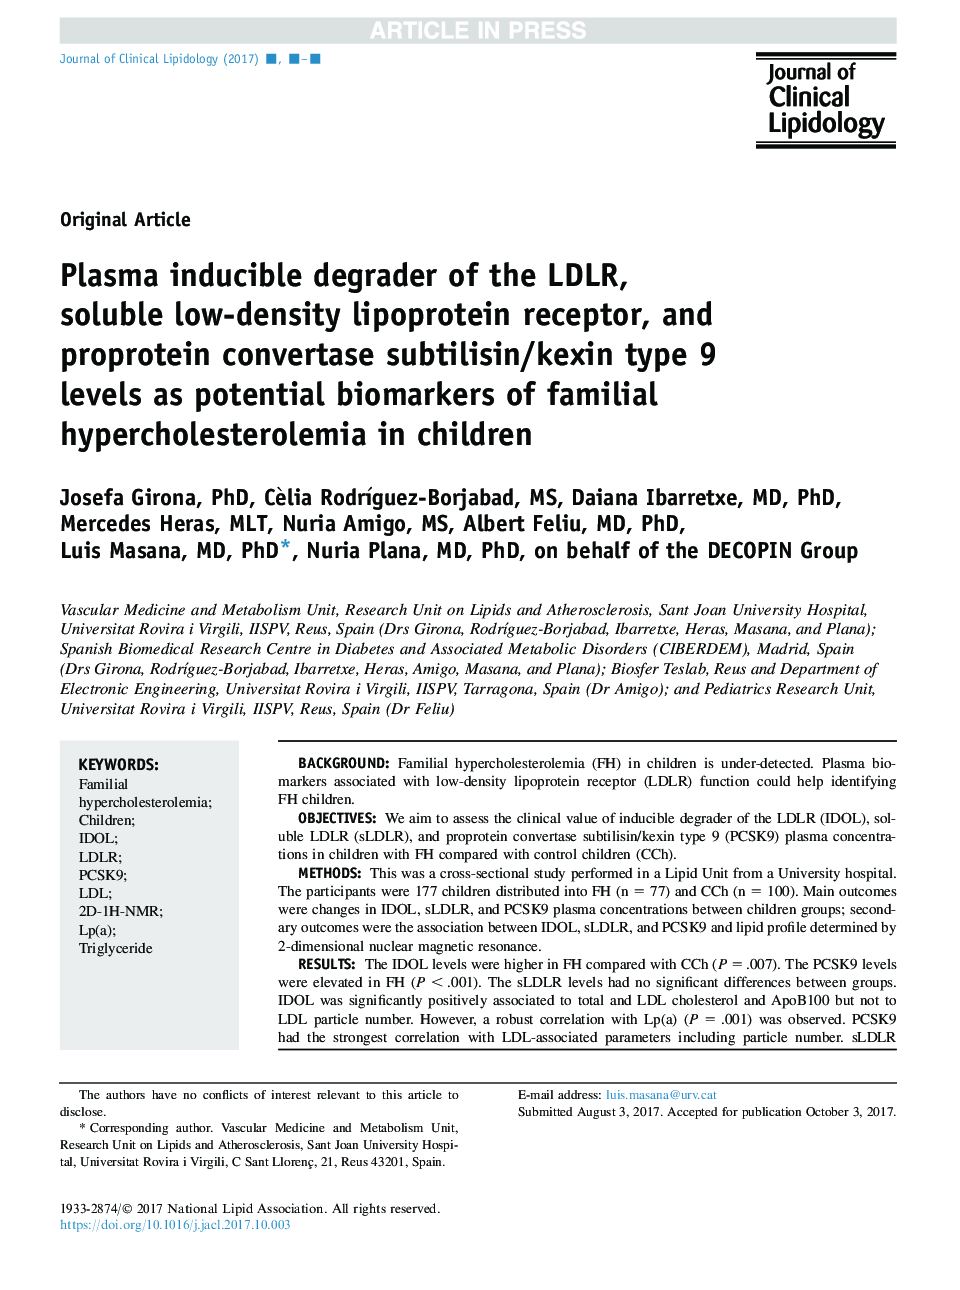 Plasma inducible degrader of the LDLR, soluble low-density lipoprotein receptor, and proprotein convertase subtilisin/kexin type 9 levels as potential biomarkers of familial hypercholesterolemia in children